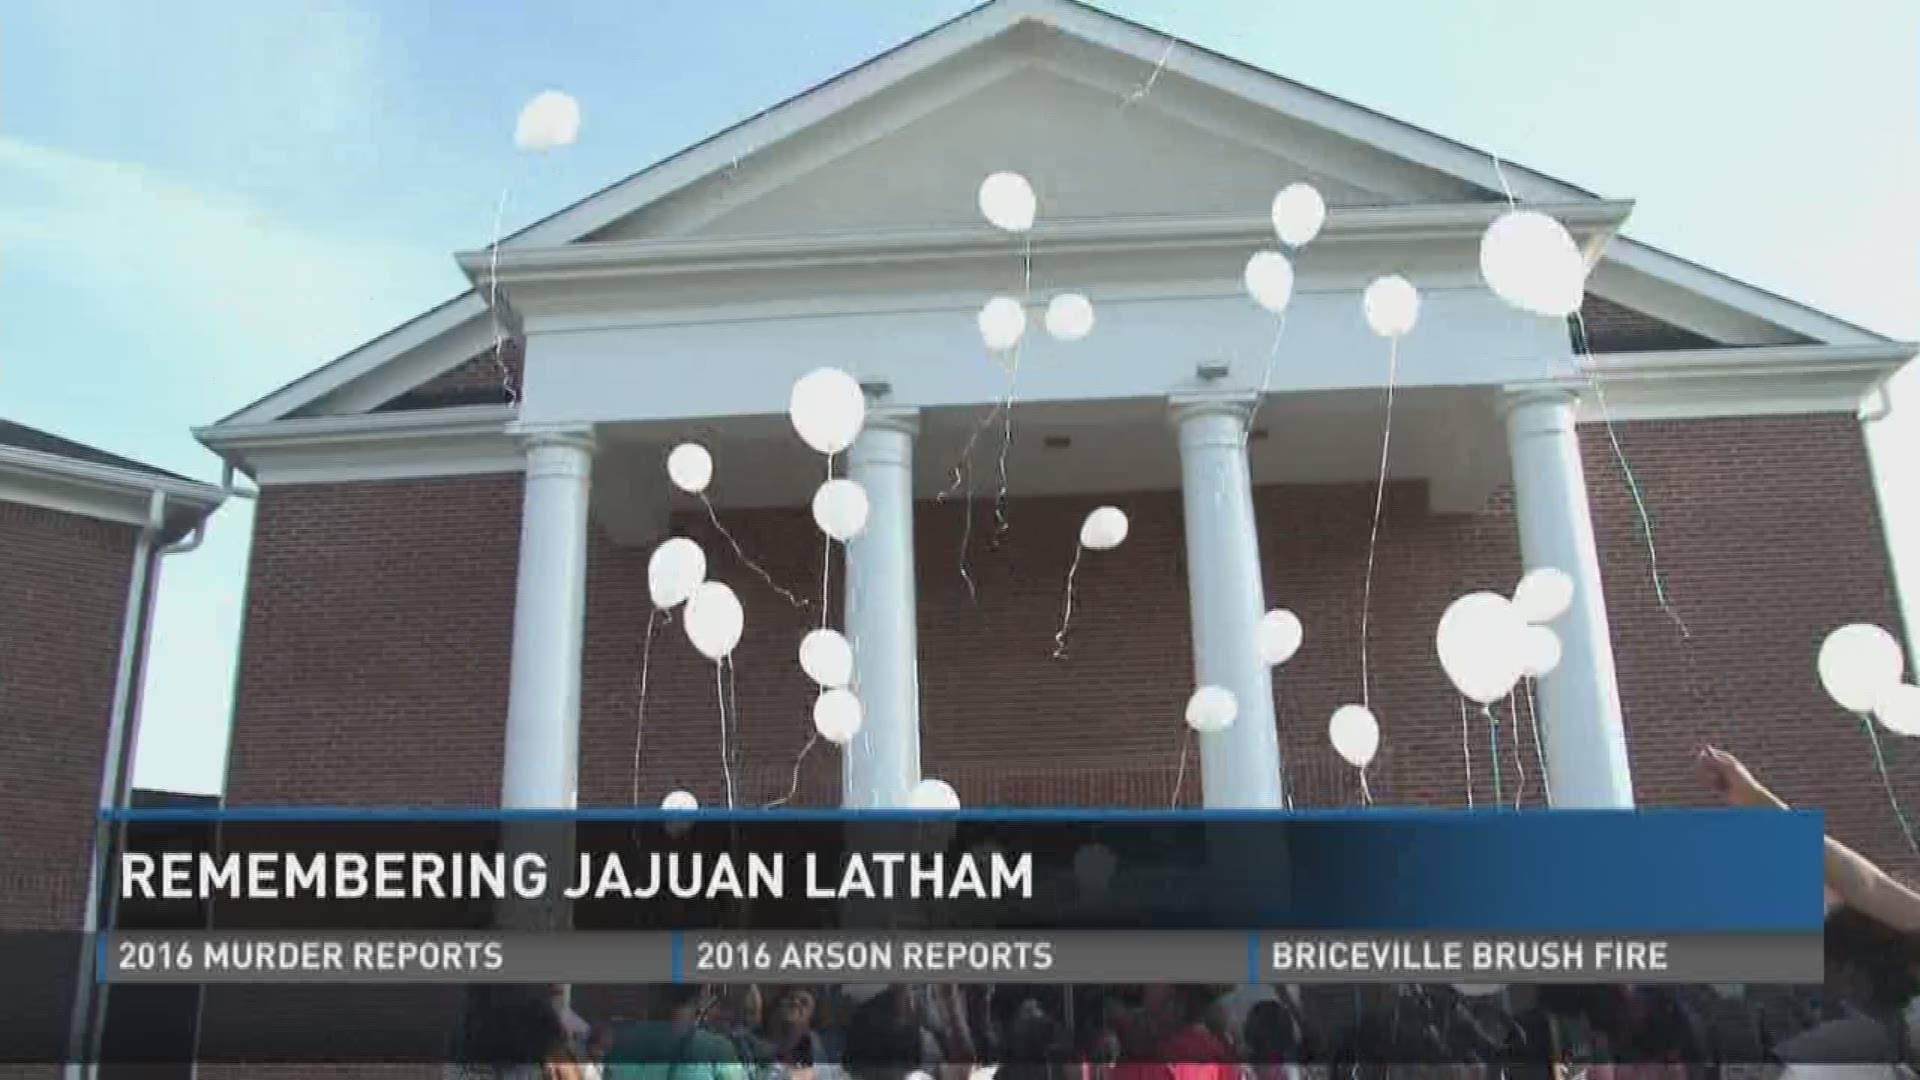 April 14, 2017: Almost one year after he was killed in a gang-related shooting, family and friends gathered to remember 12-year-old Jajuan Latham.